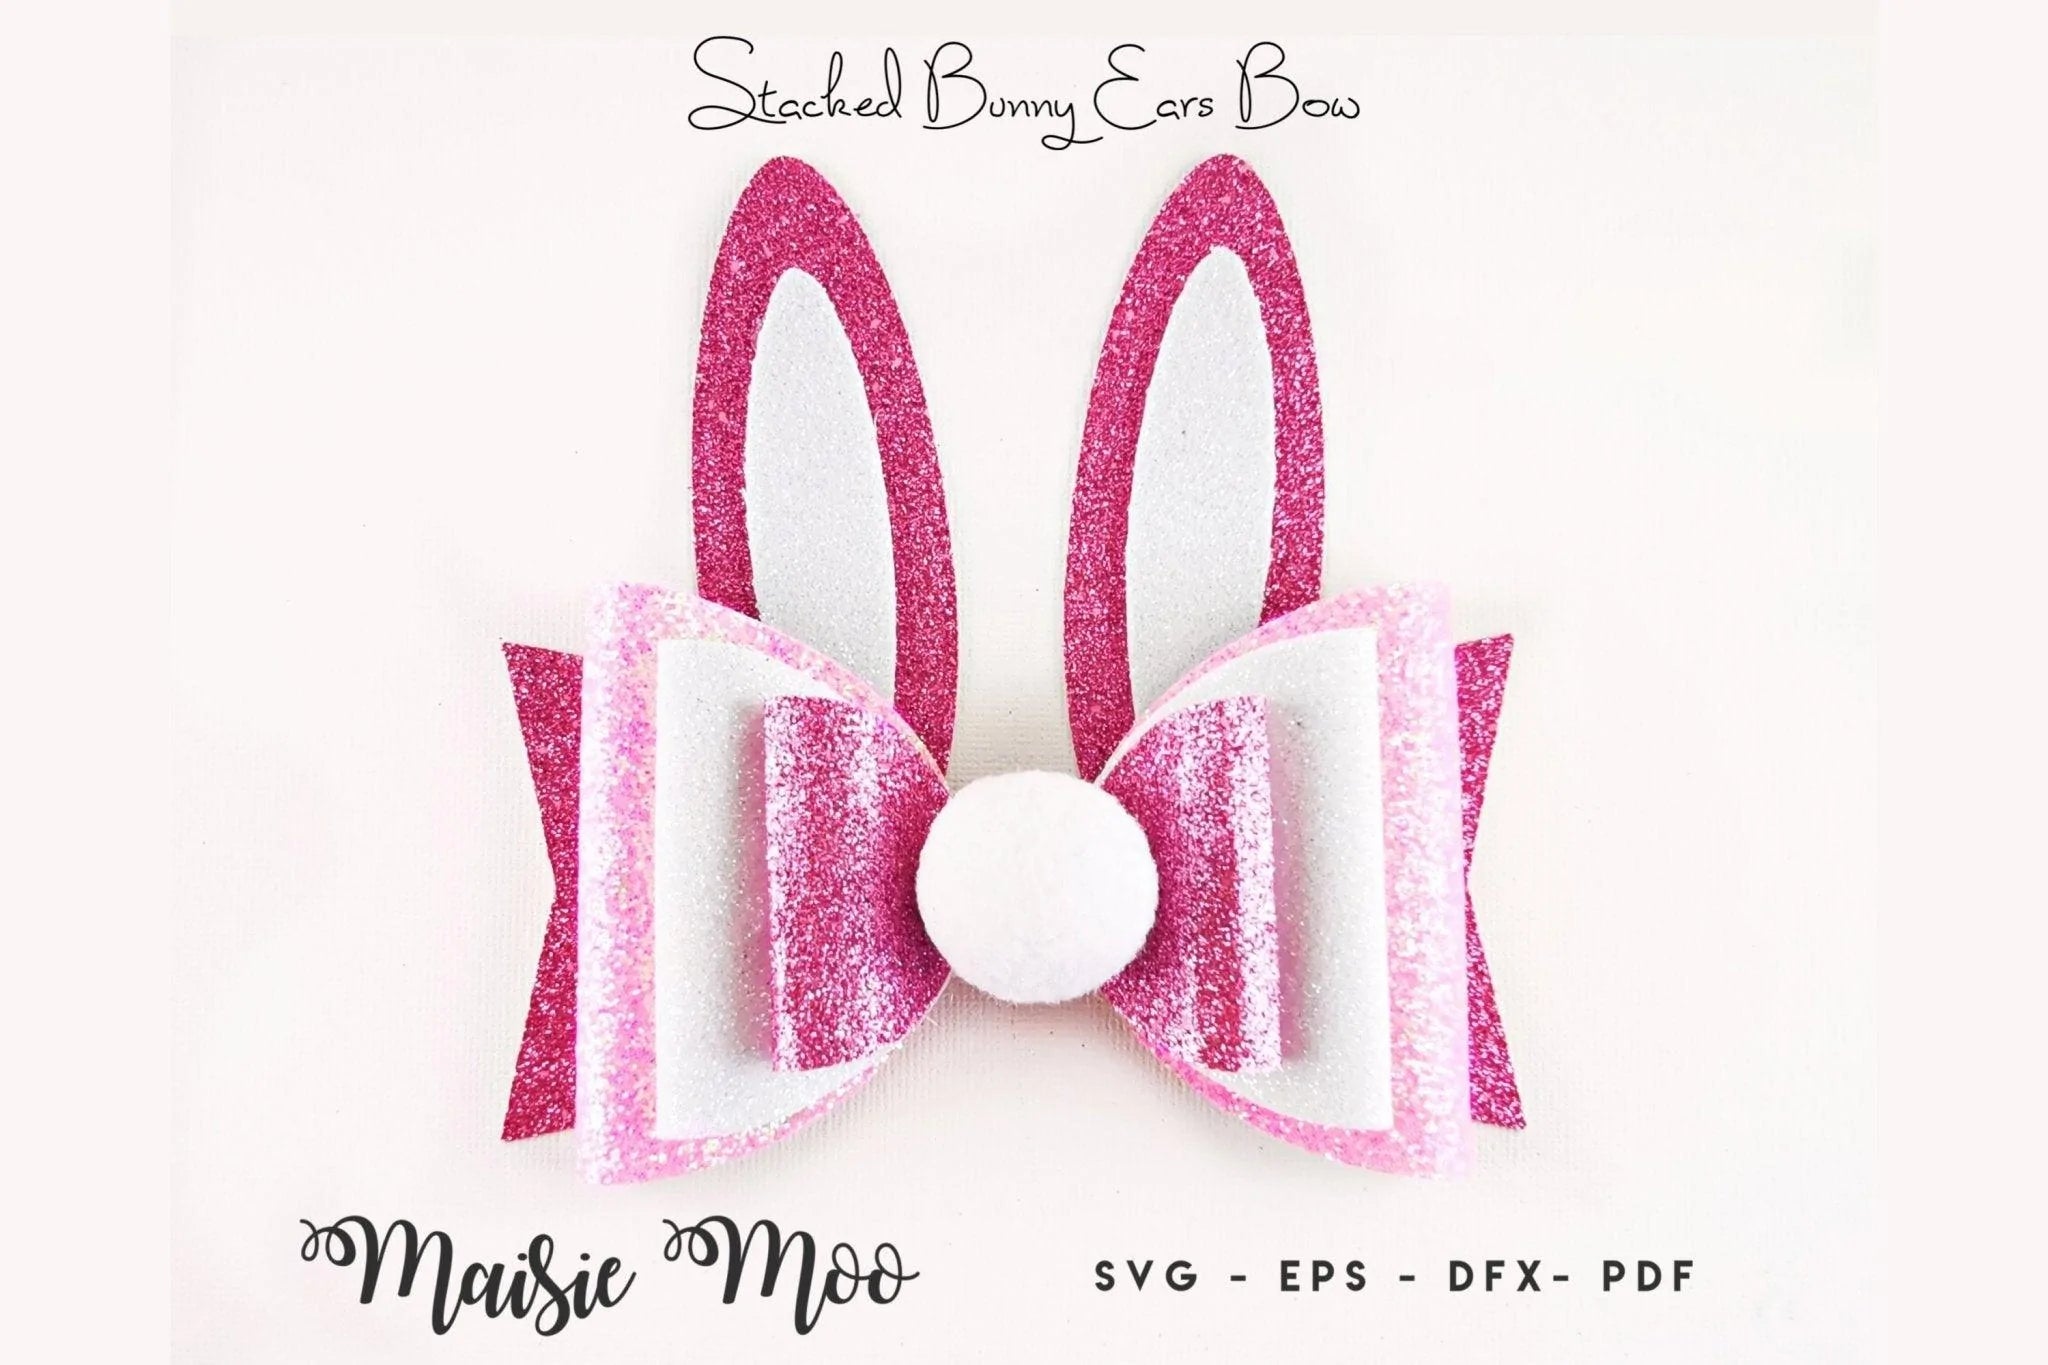 Combined Bow & Earring Card SVG – Maisie Moo